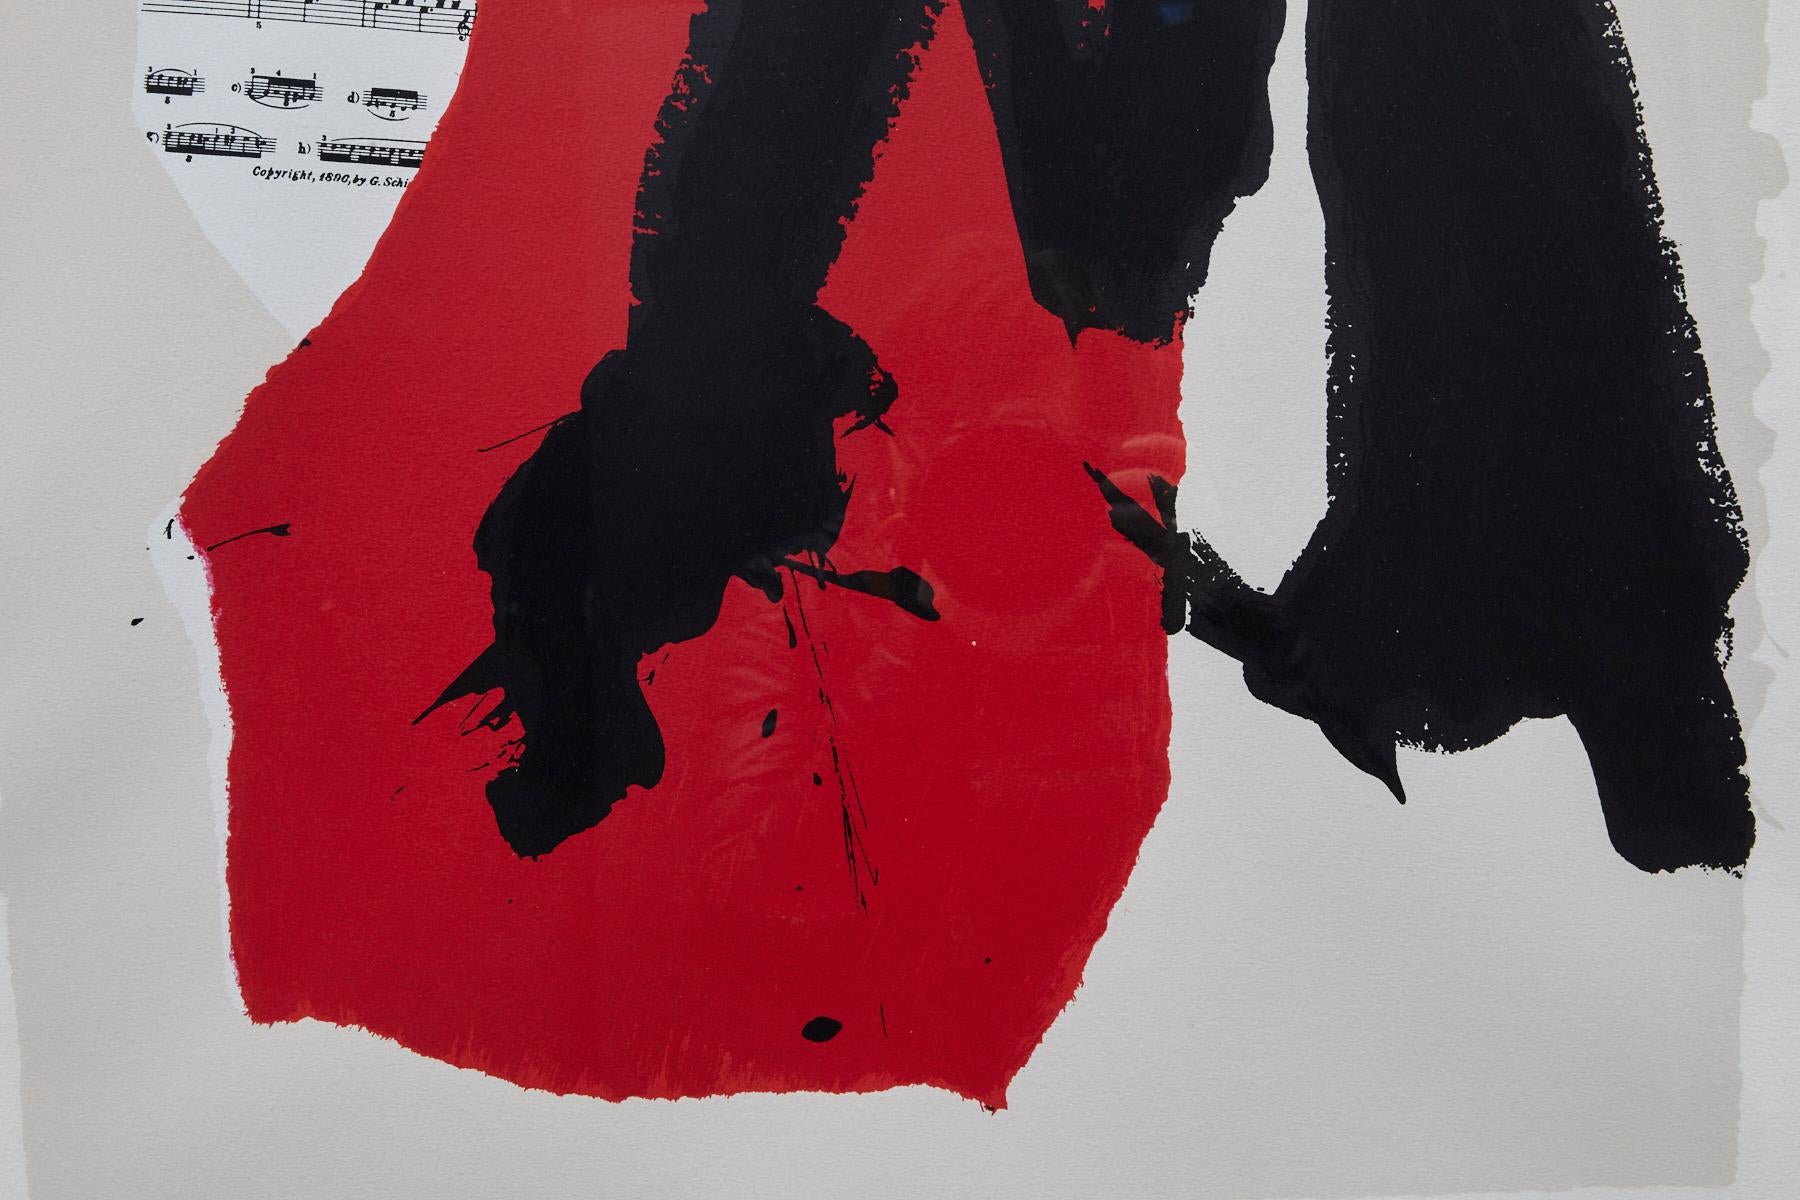 Robert Motherwell, American (1915 - 1991)
Lincoln Center's Mostly Mozart Festival, 25th Anniversary.
Lithograph, Edition of 800, unsigned and unnumbered. Framed.
Printer: Trestle Editions Ltd, NY - Publisher: Artist
Measurements: Frame H 42.38 x W